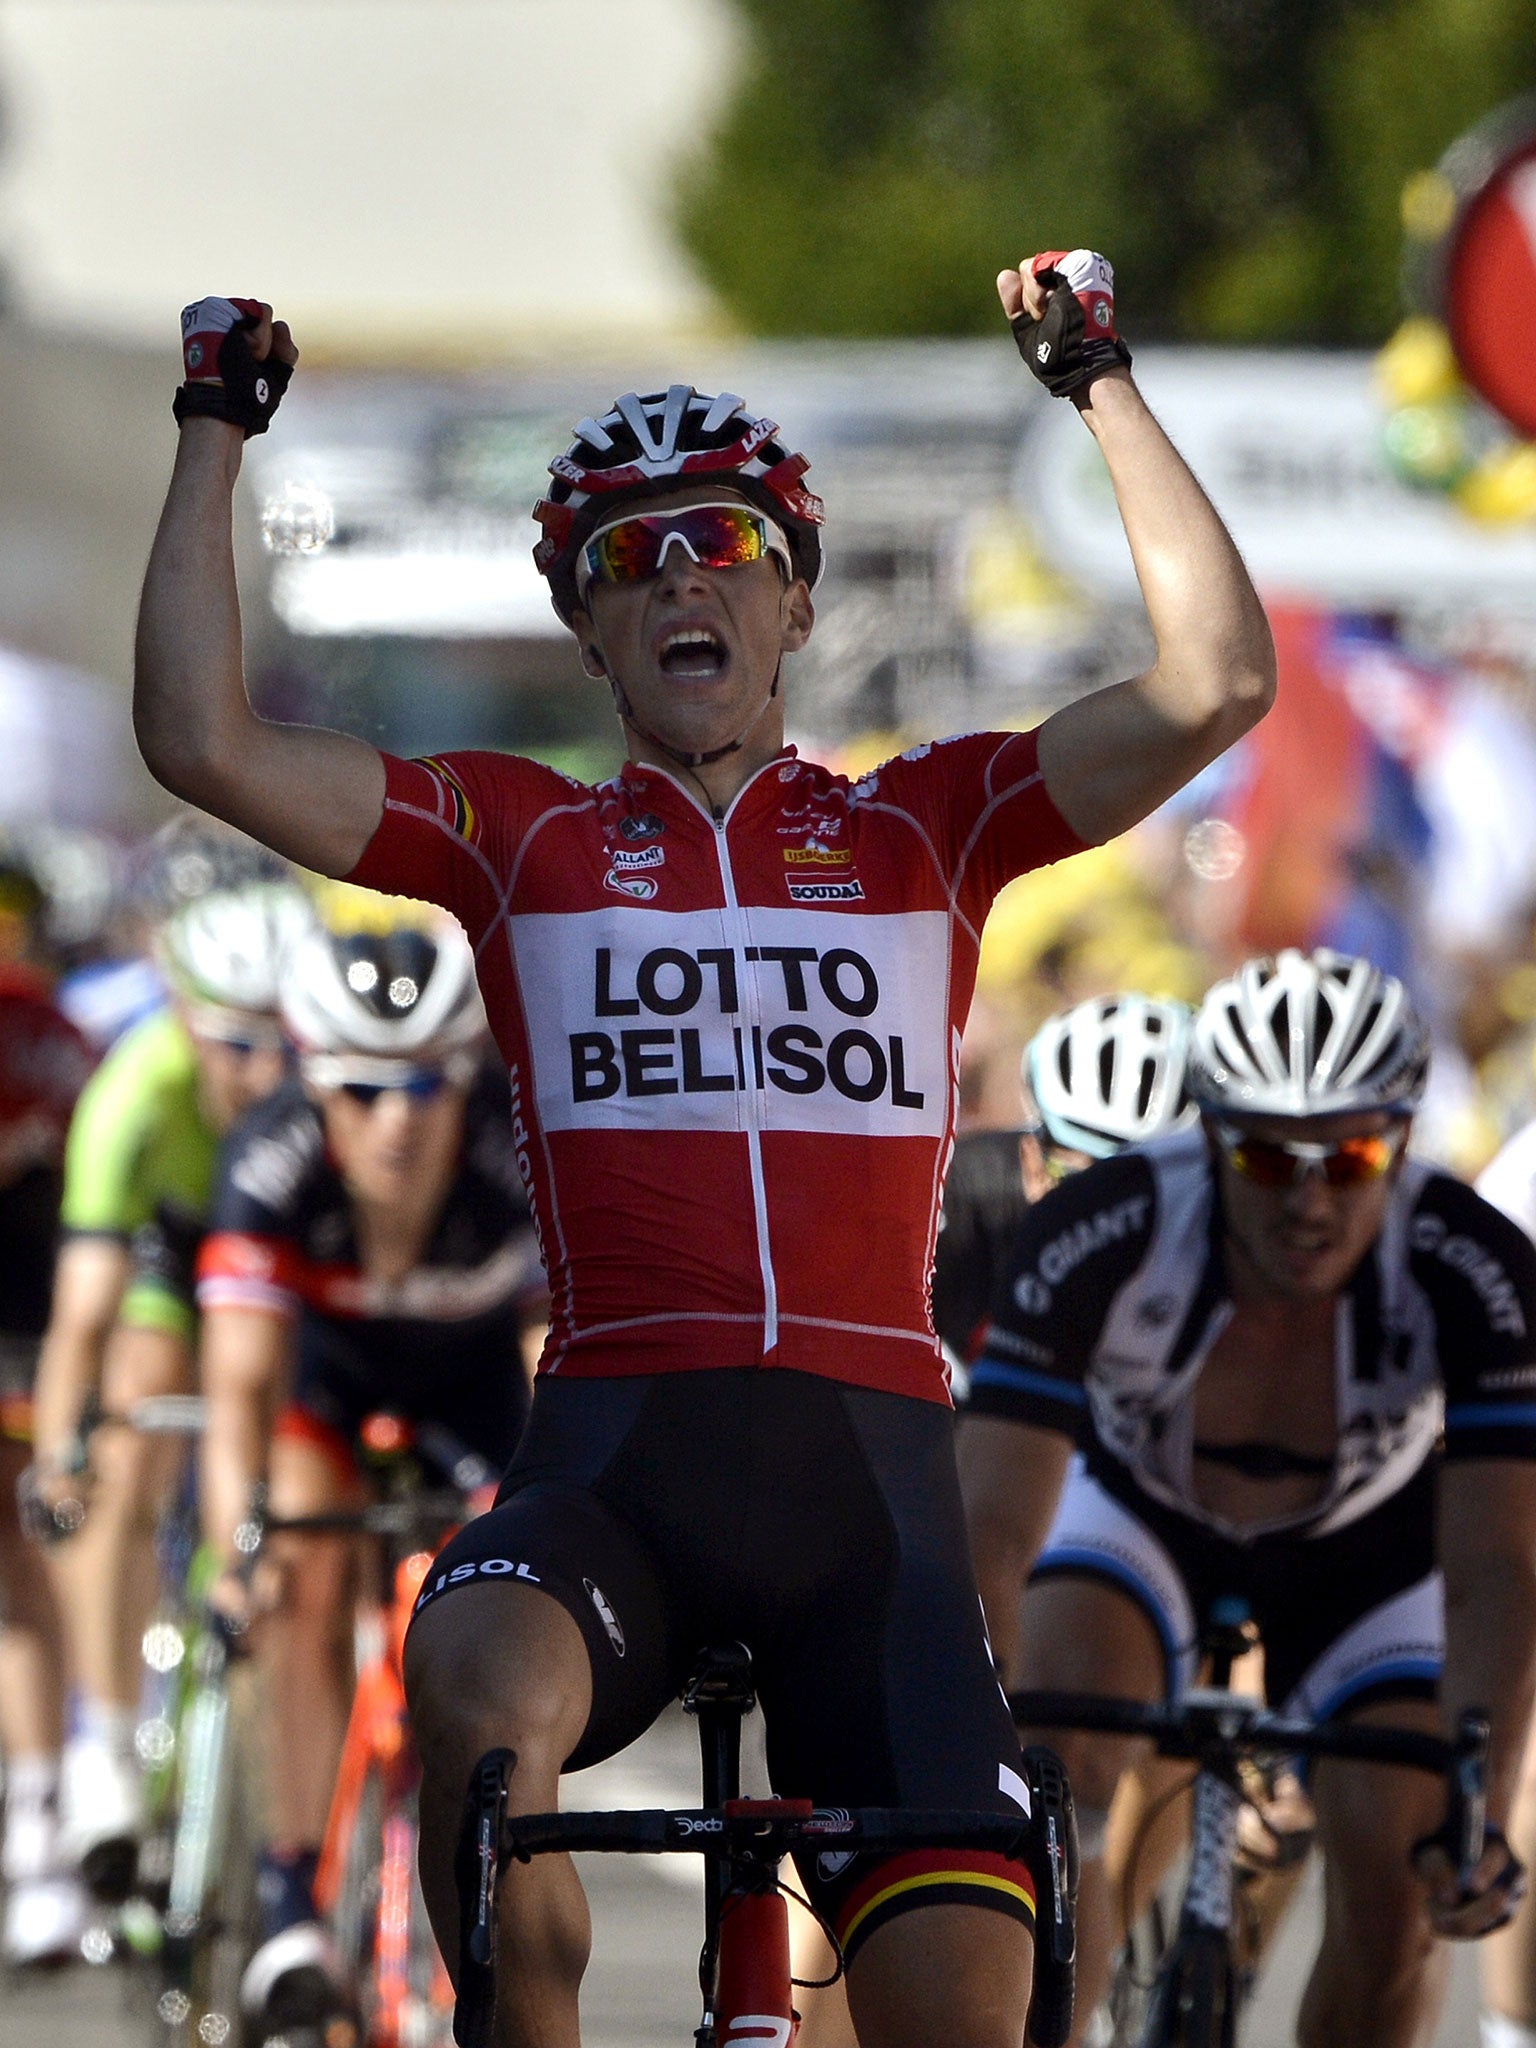 Tony Gallopin gave France reason to cheer on stage 11